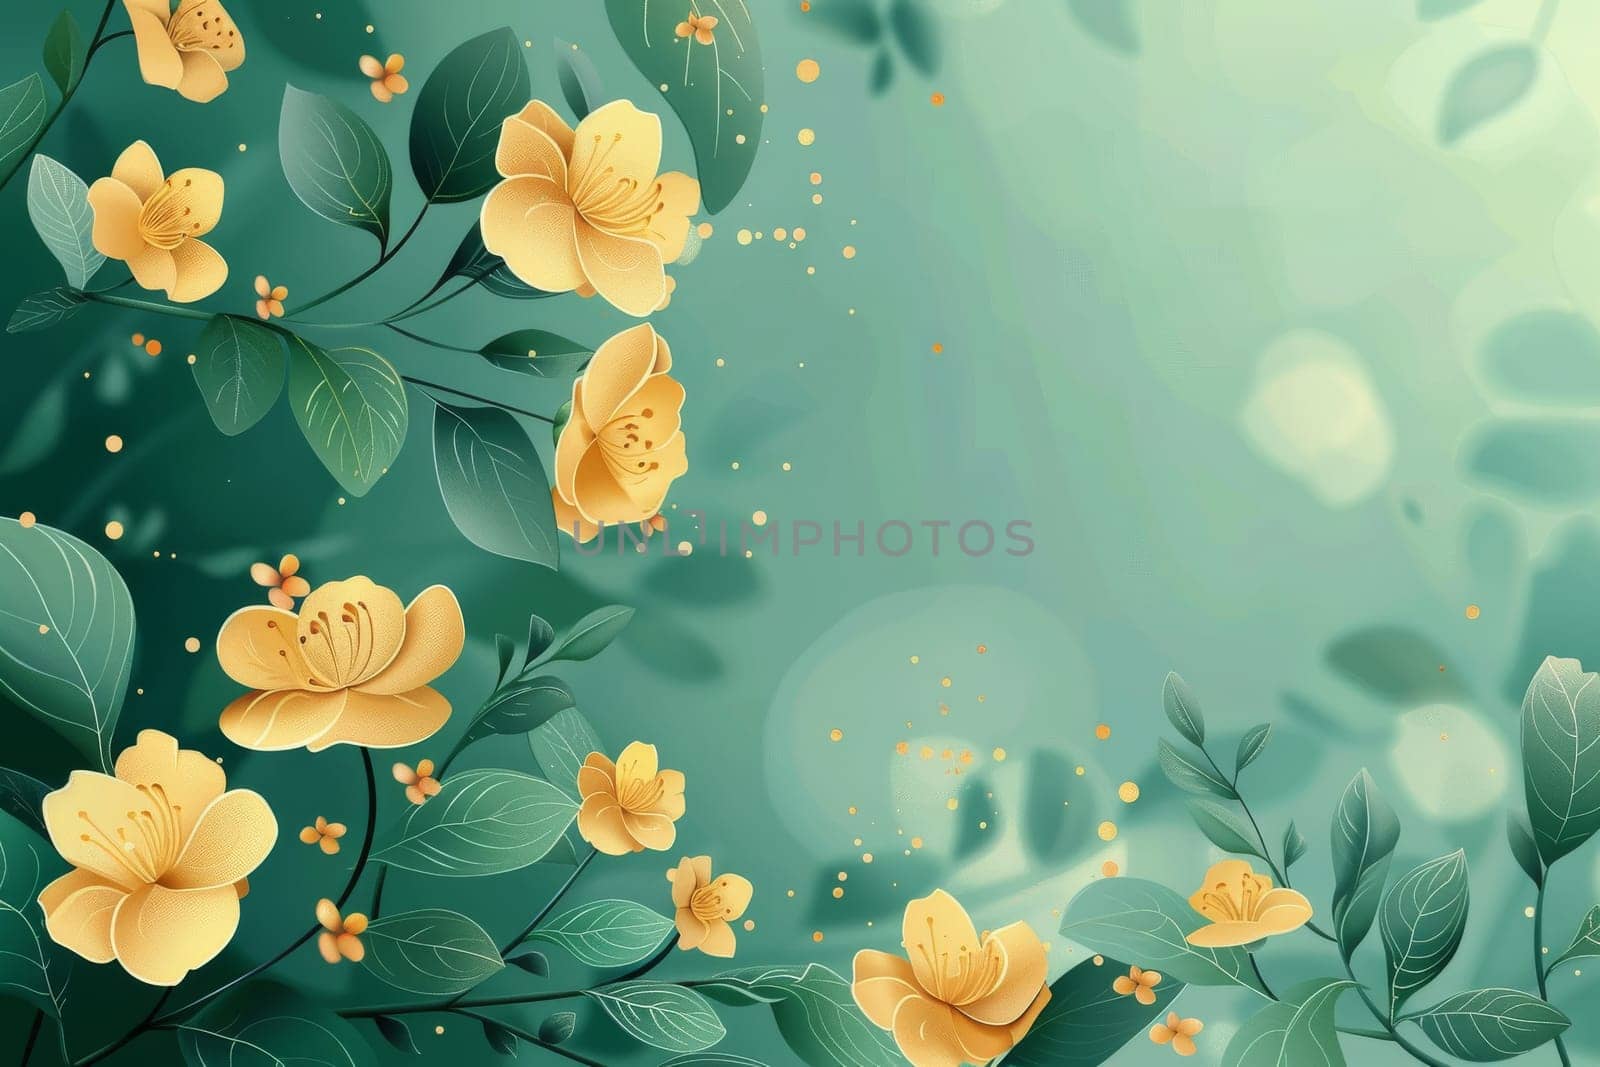 A gold and green flower with leaves is on a green background.